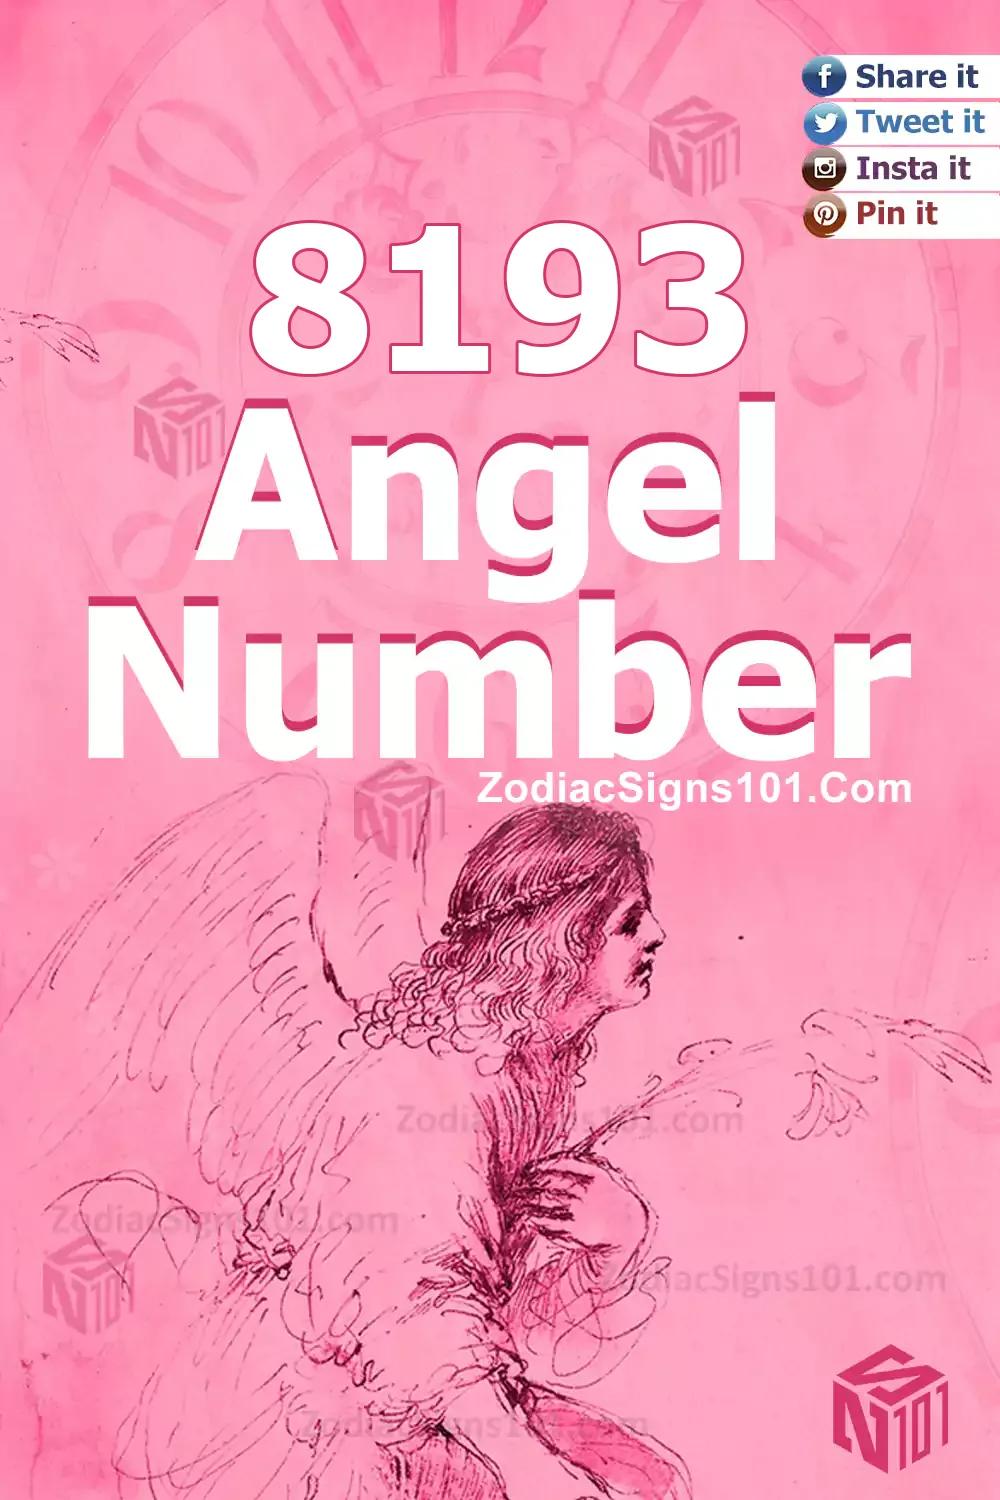 8193 Angel Number Meaning